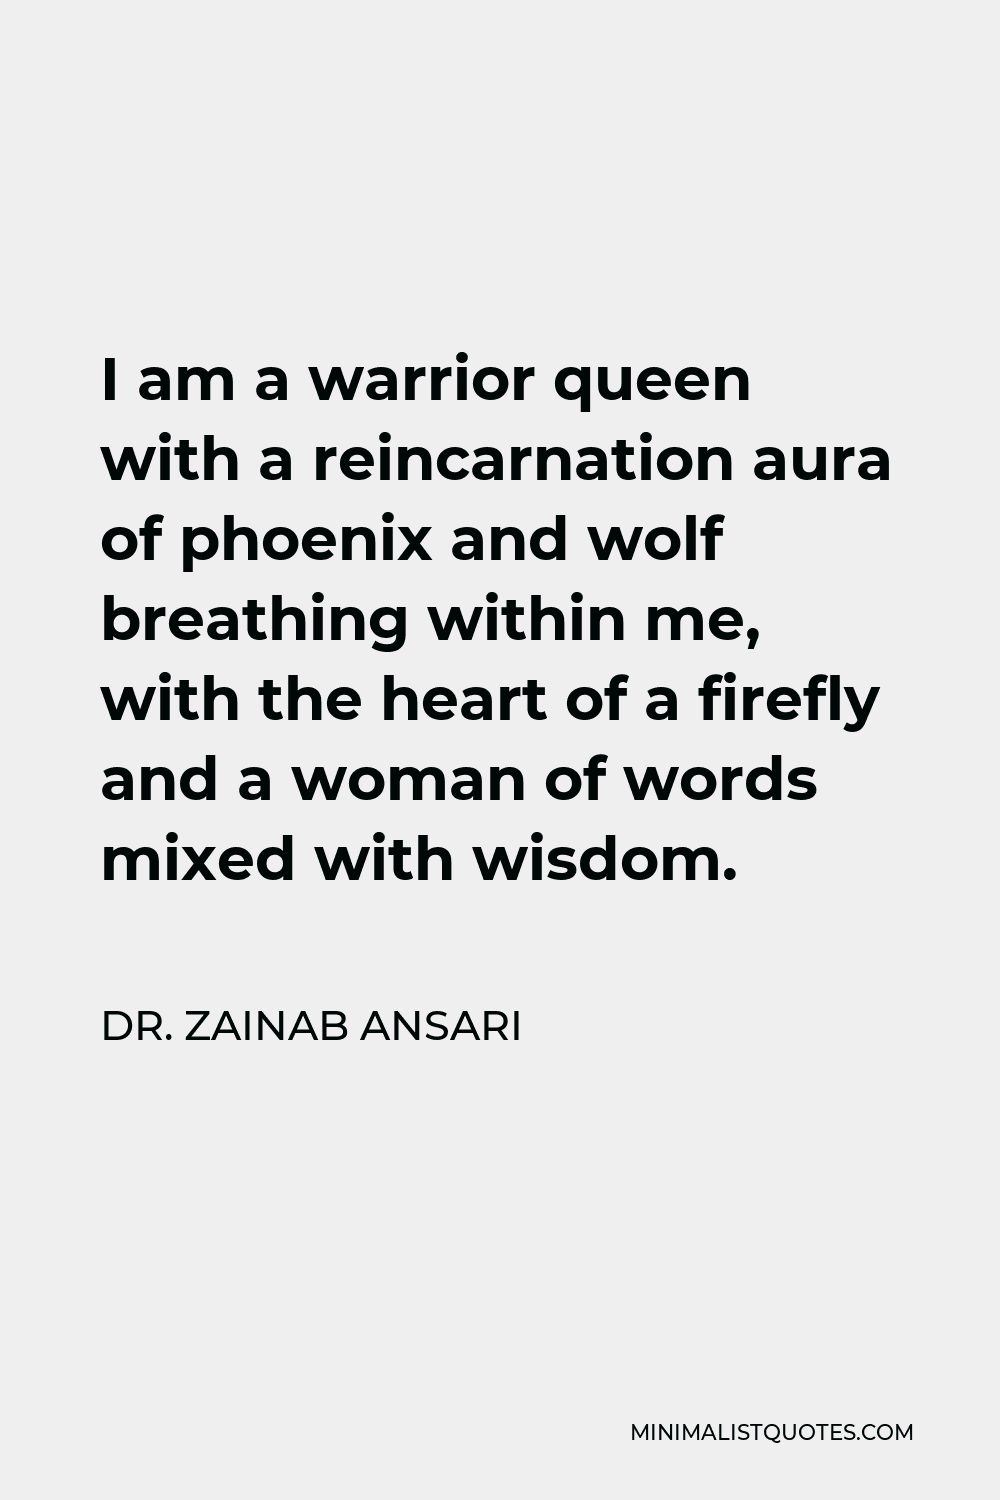 Dr. Zainab Ansari Quote - I am a warrior queen with a reincarnation aura of phoenix and wolf breathing within me, with the heart of a firefly and a woman of words mixed with wisdom.